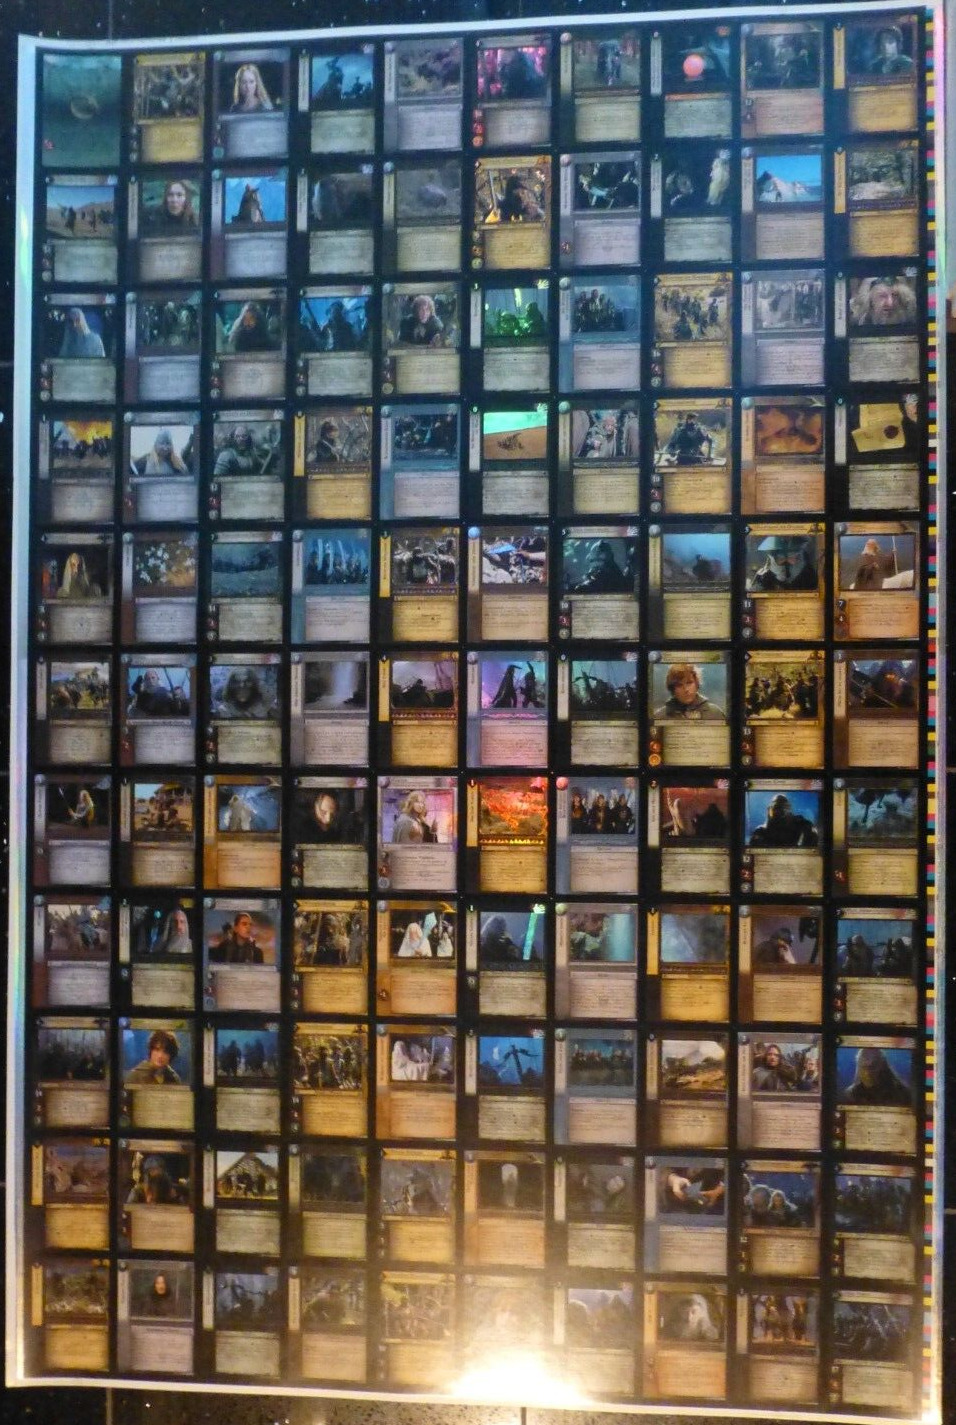 TCG 2 / Lord of the Rings Spread / Uncut Sheet The Two Towers FOIL Rare 4R1